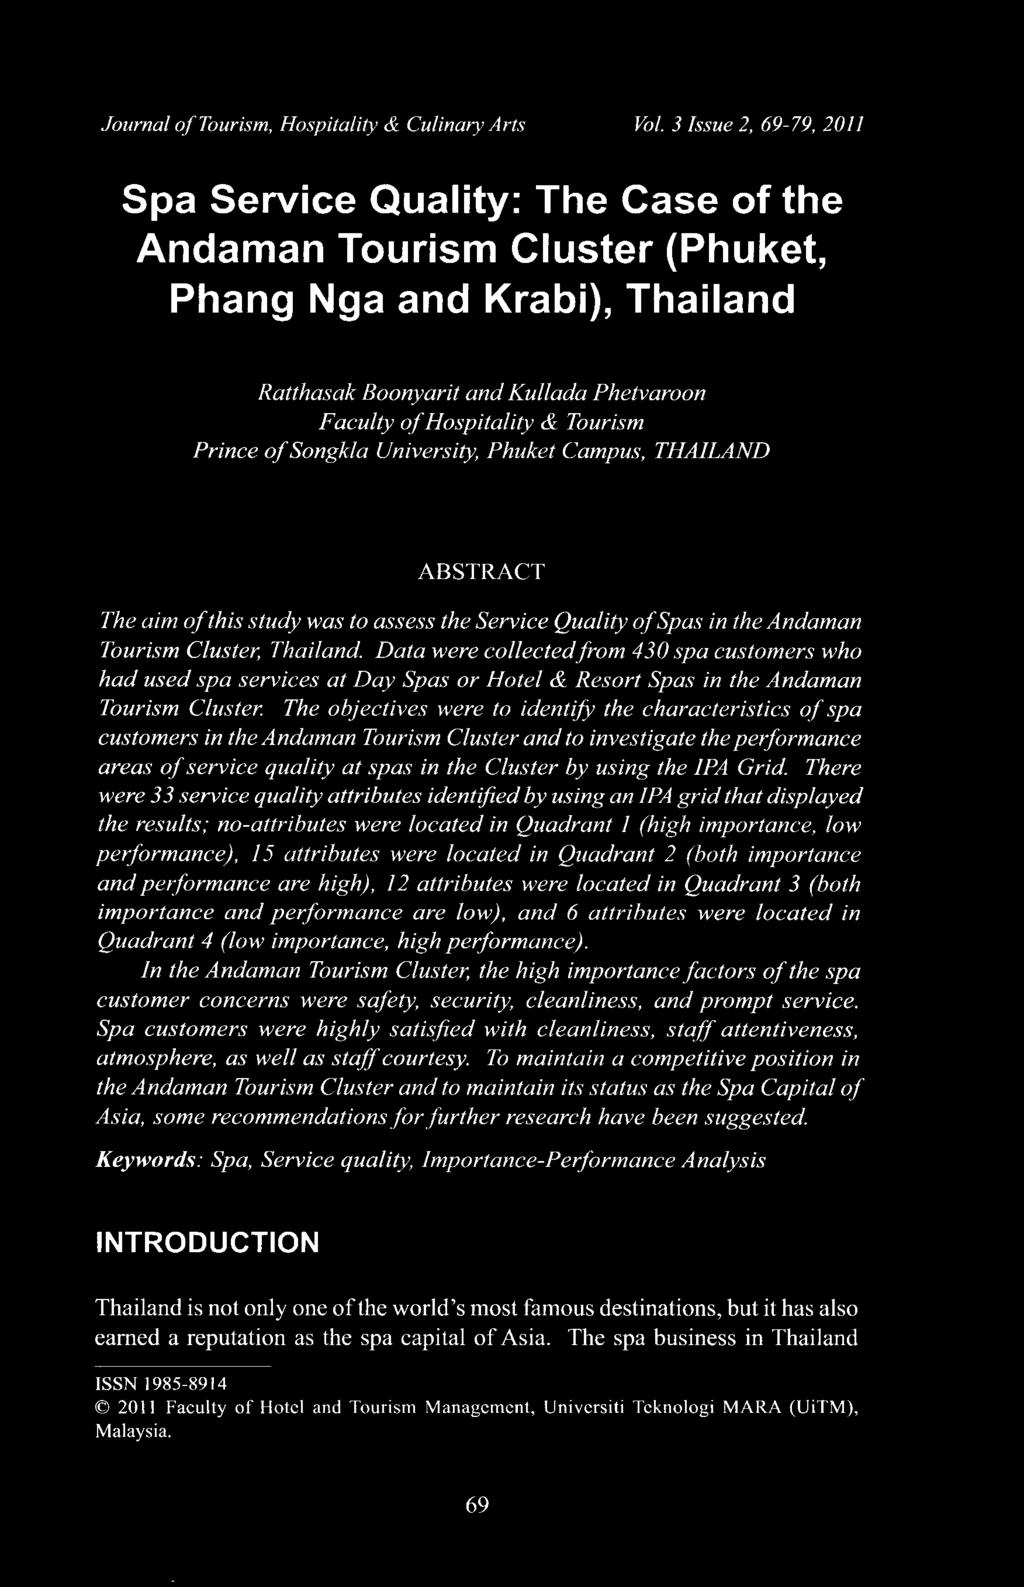 Prince of Songkla University, Phuket Campus, THAILAND ABSTRACT The aim of this study was to assess the Service Quality of Spas in the Andaman Tourism Cluster, Thailand.